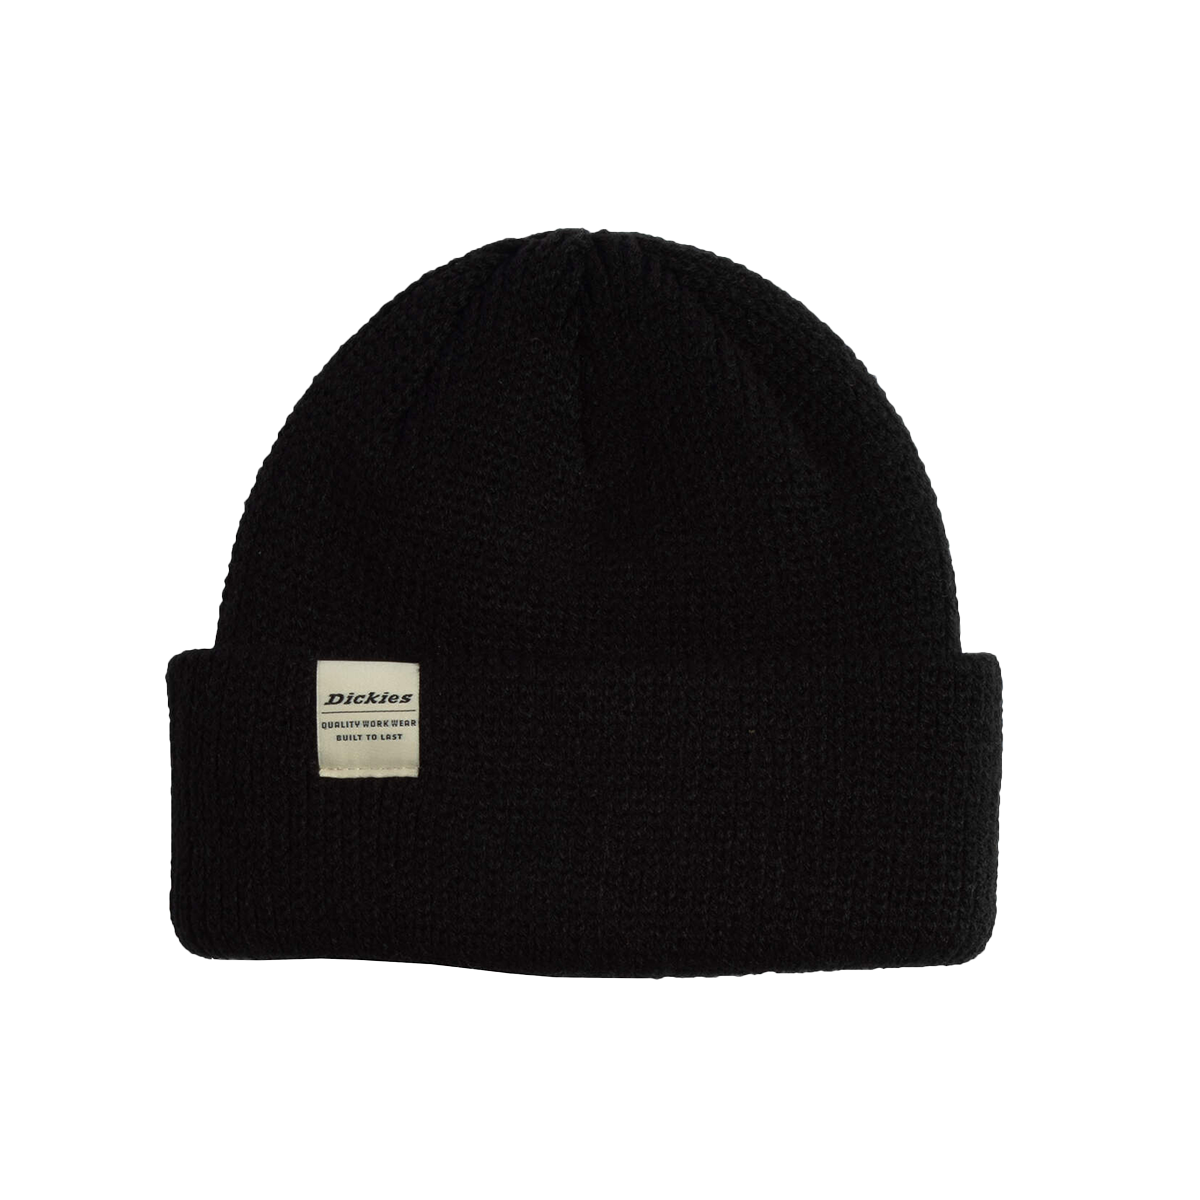 Dickies Thick Knit Beanie